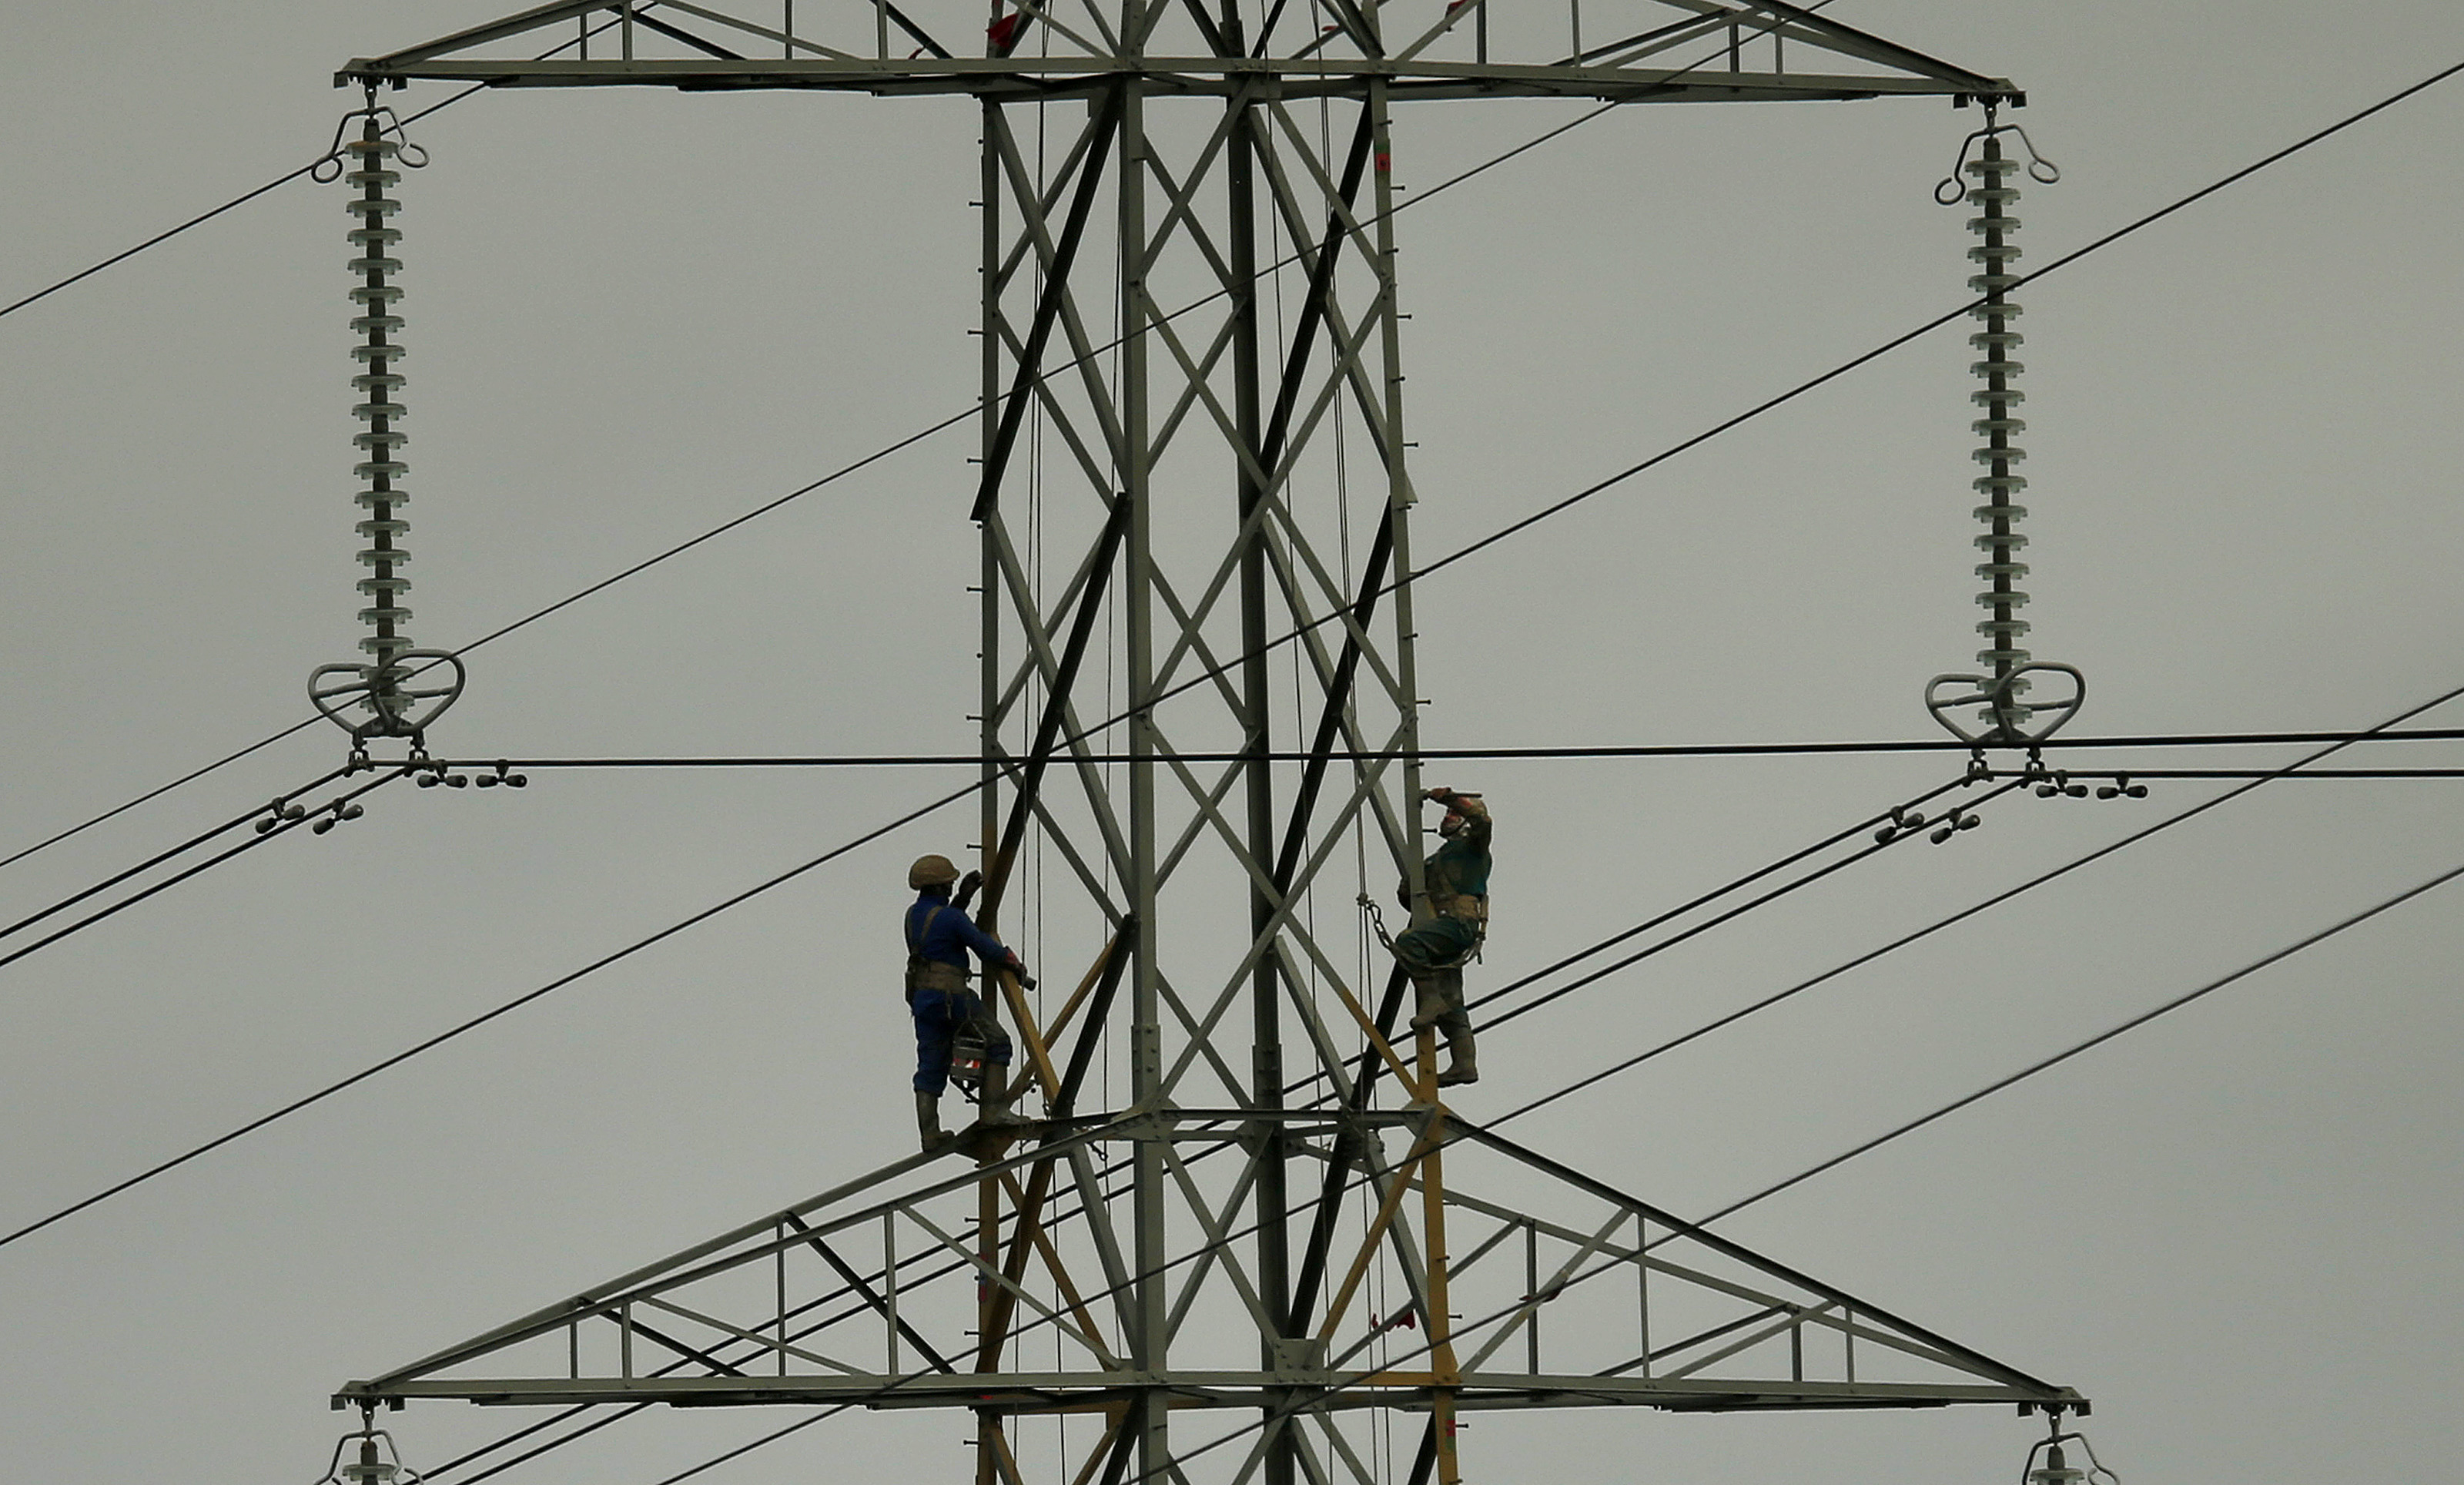 Workers paint an electricity pylon near Lymm, northern England February 18, 2015.  REUTERS/Phil Noble  